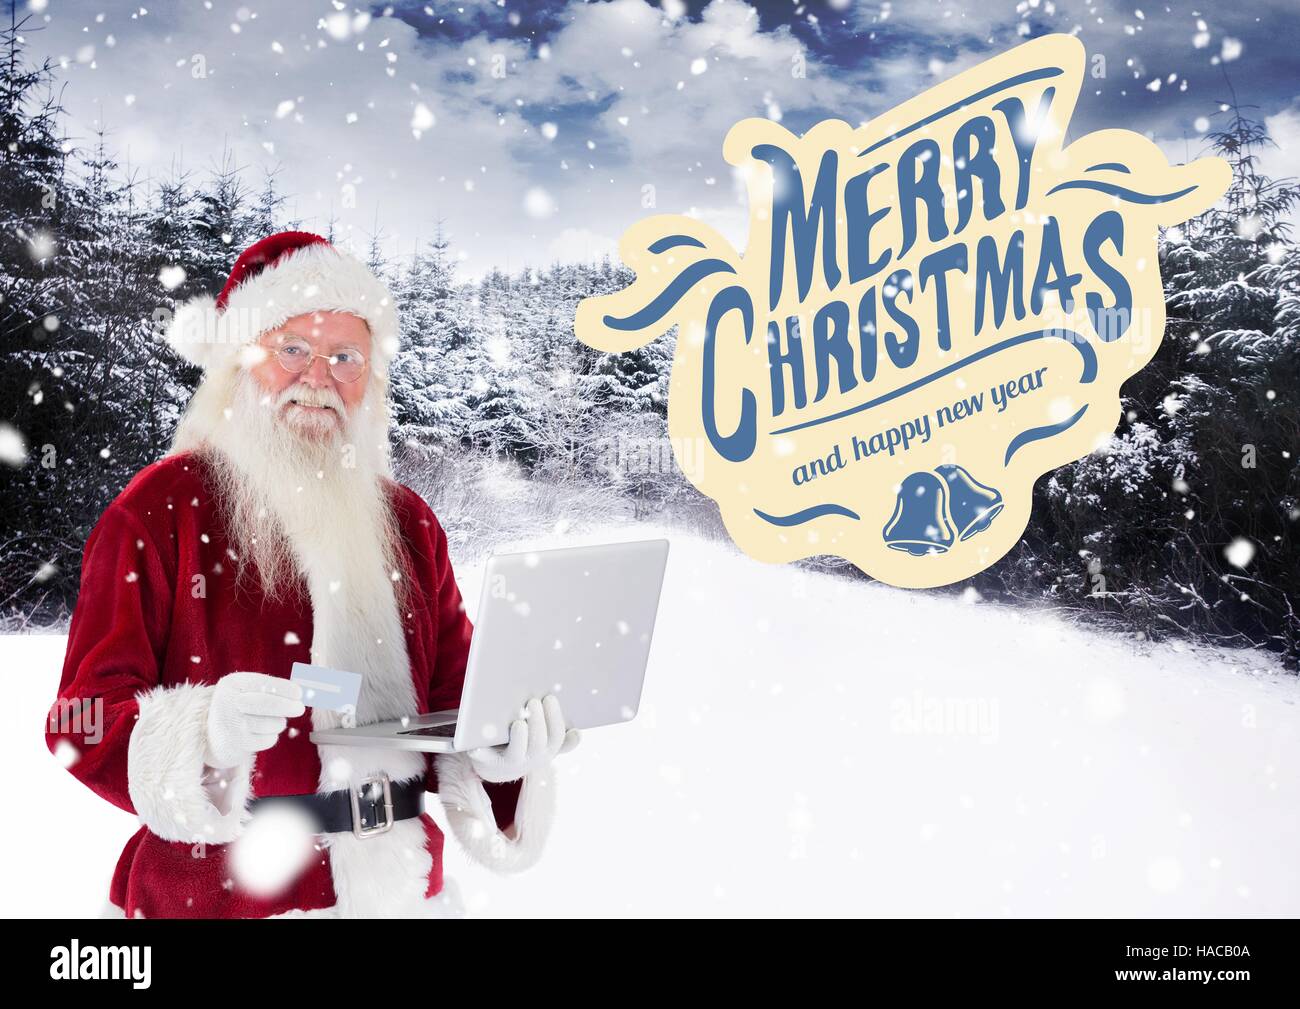 Merry christmas wishes with santa claus shopping online Stock Photo